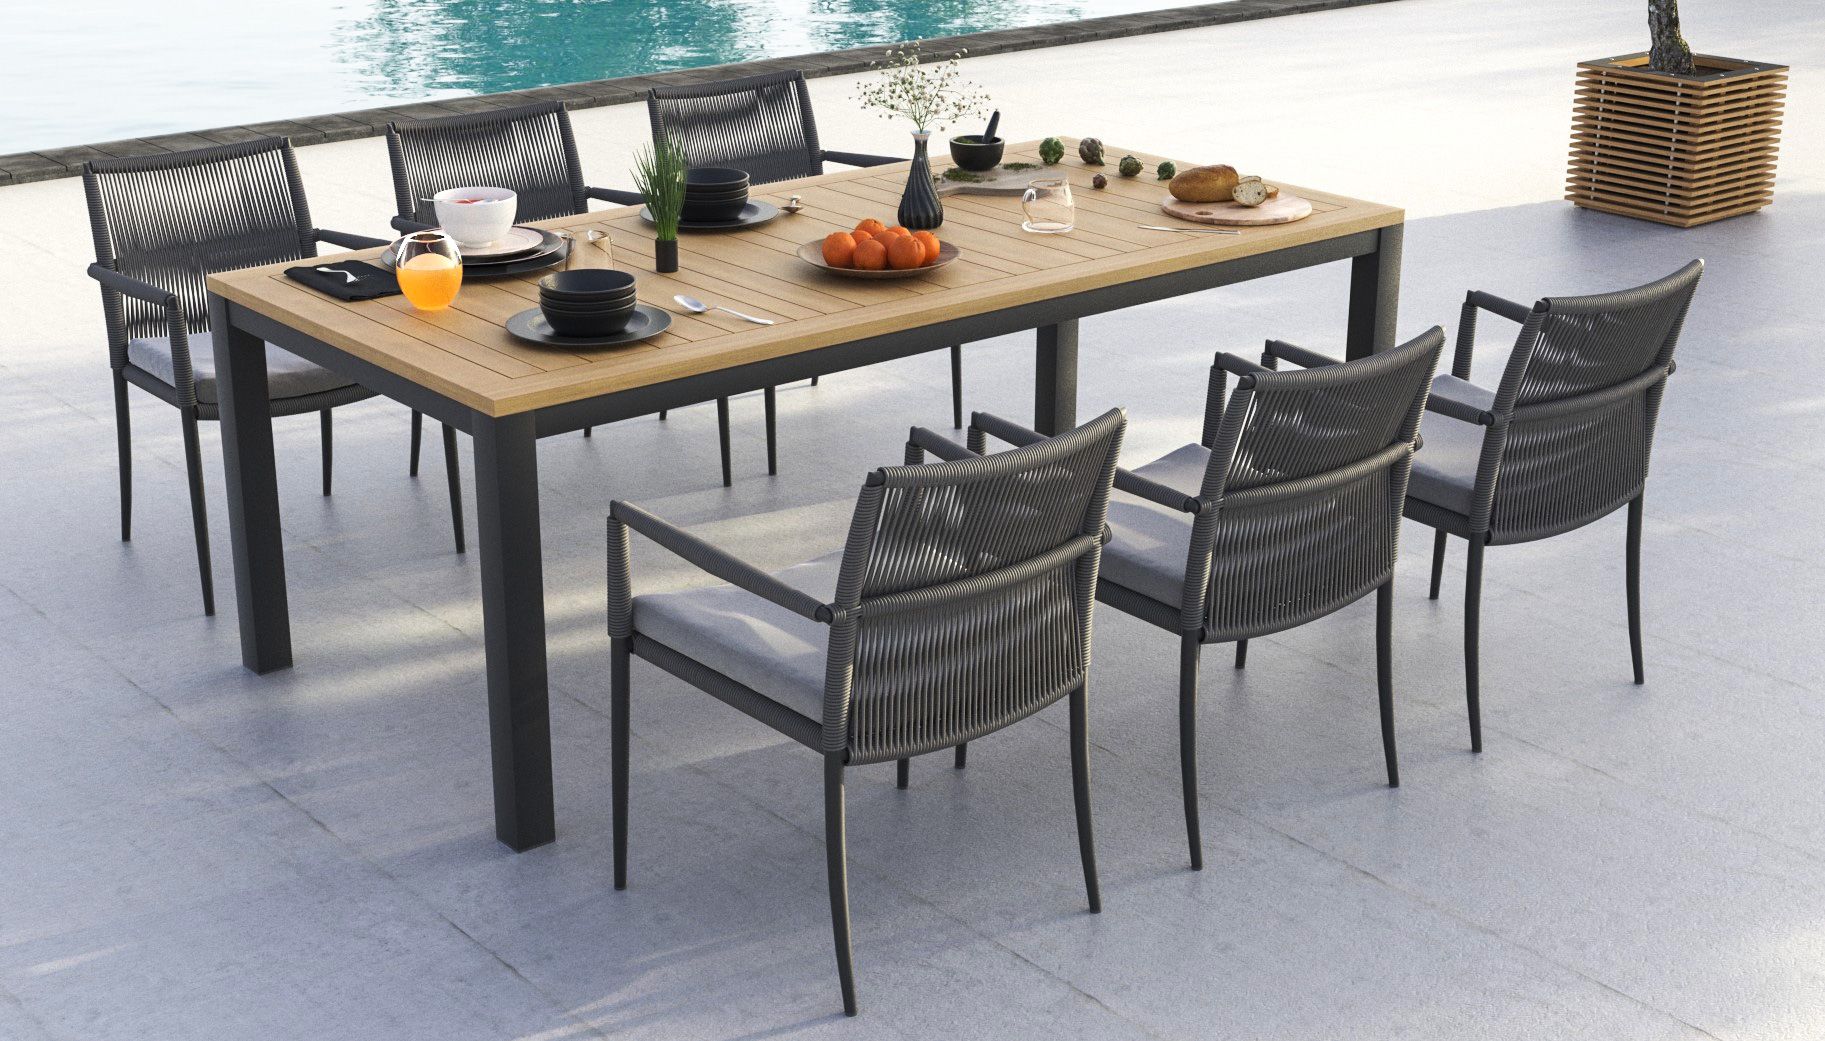 Geviner Dining Table With Cario Chairs, 10 Seat Round Outdoor Dining Table